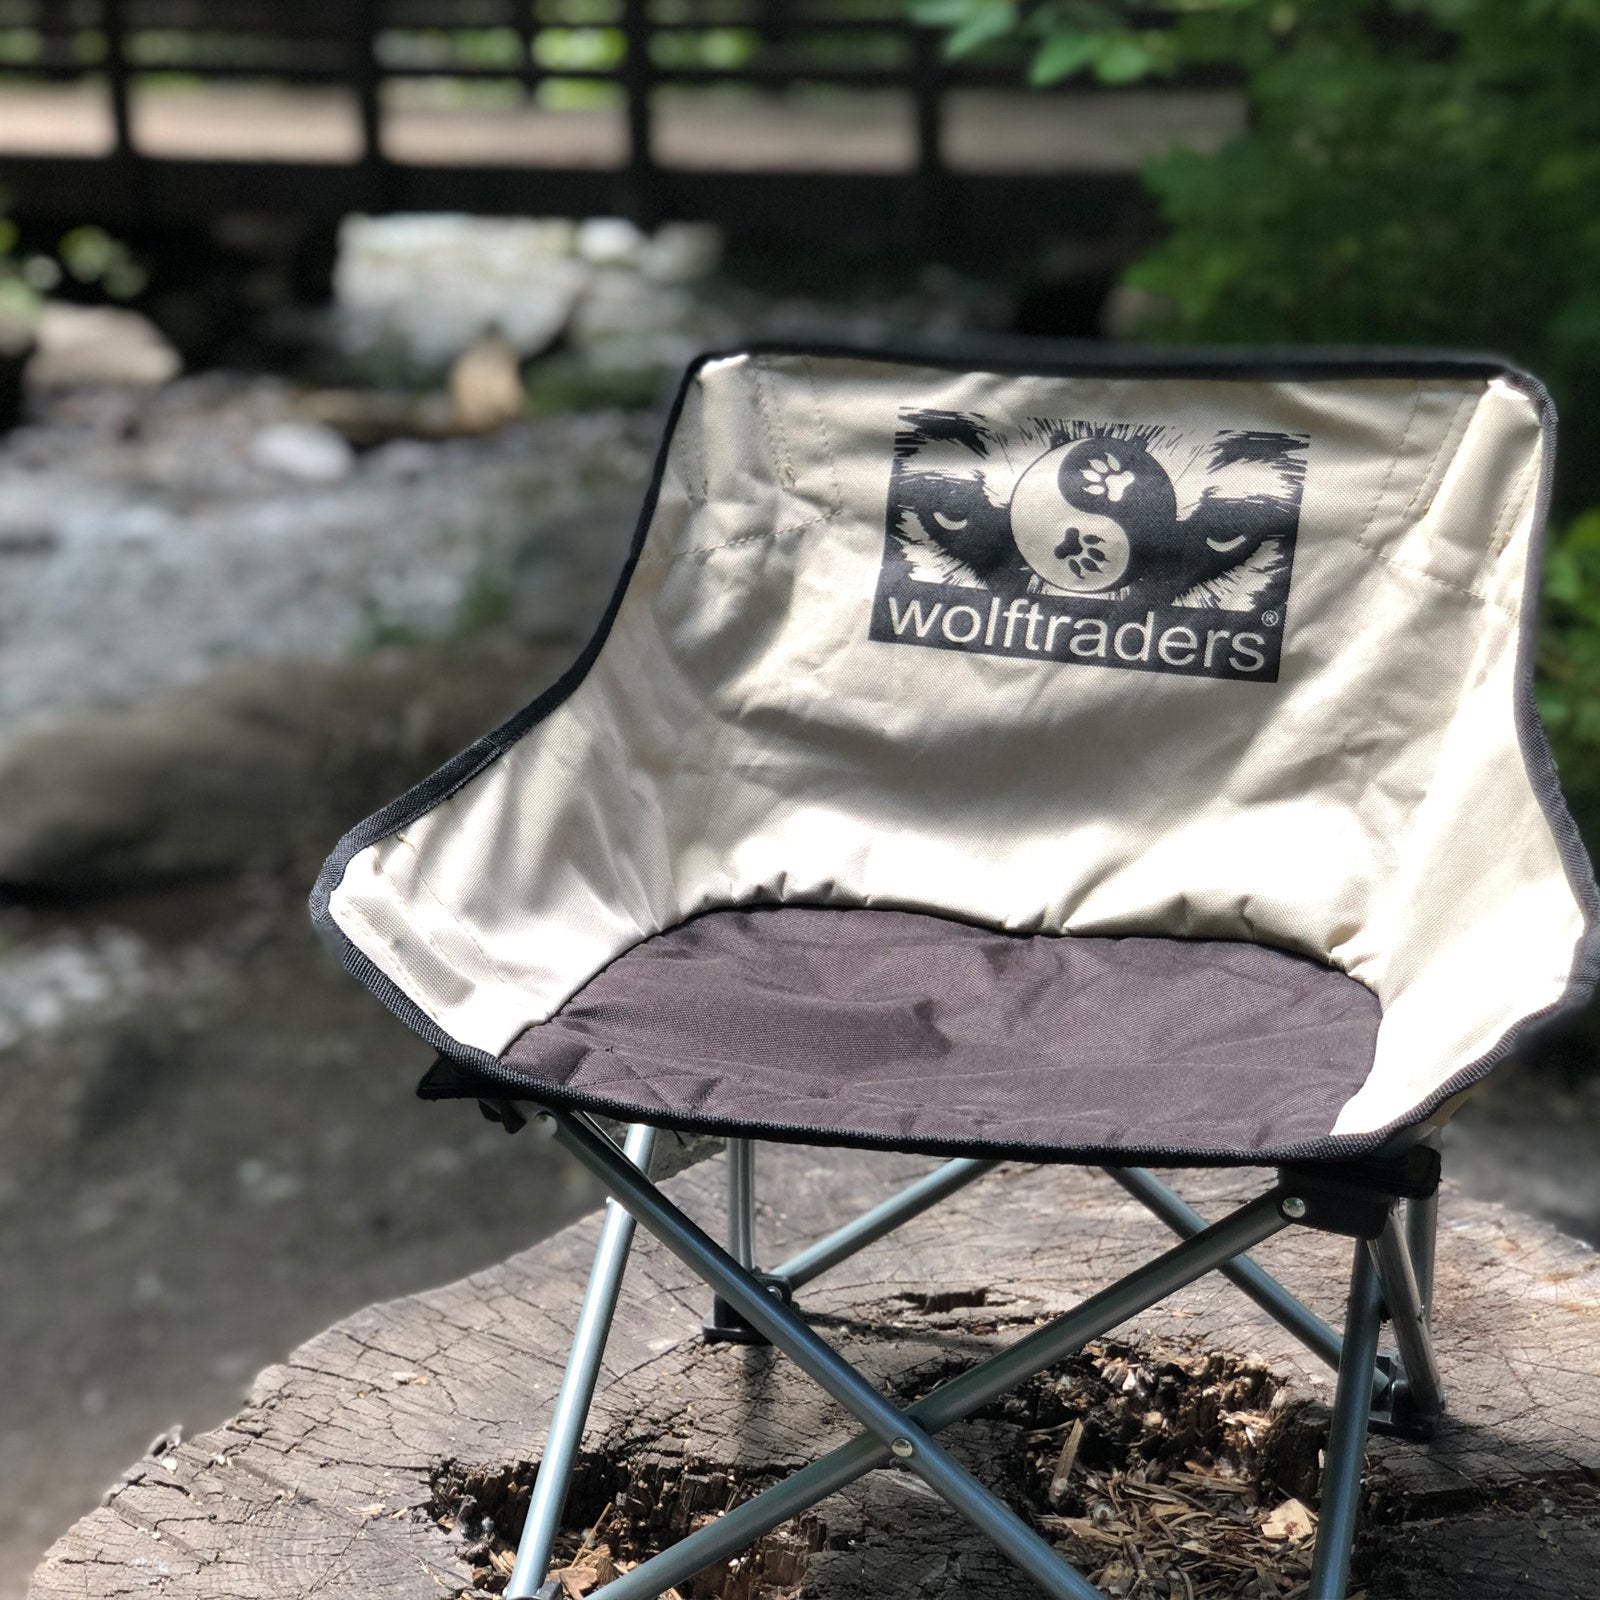 Wolftraders lilwolf small camp chair portable